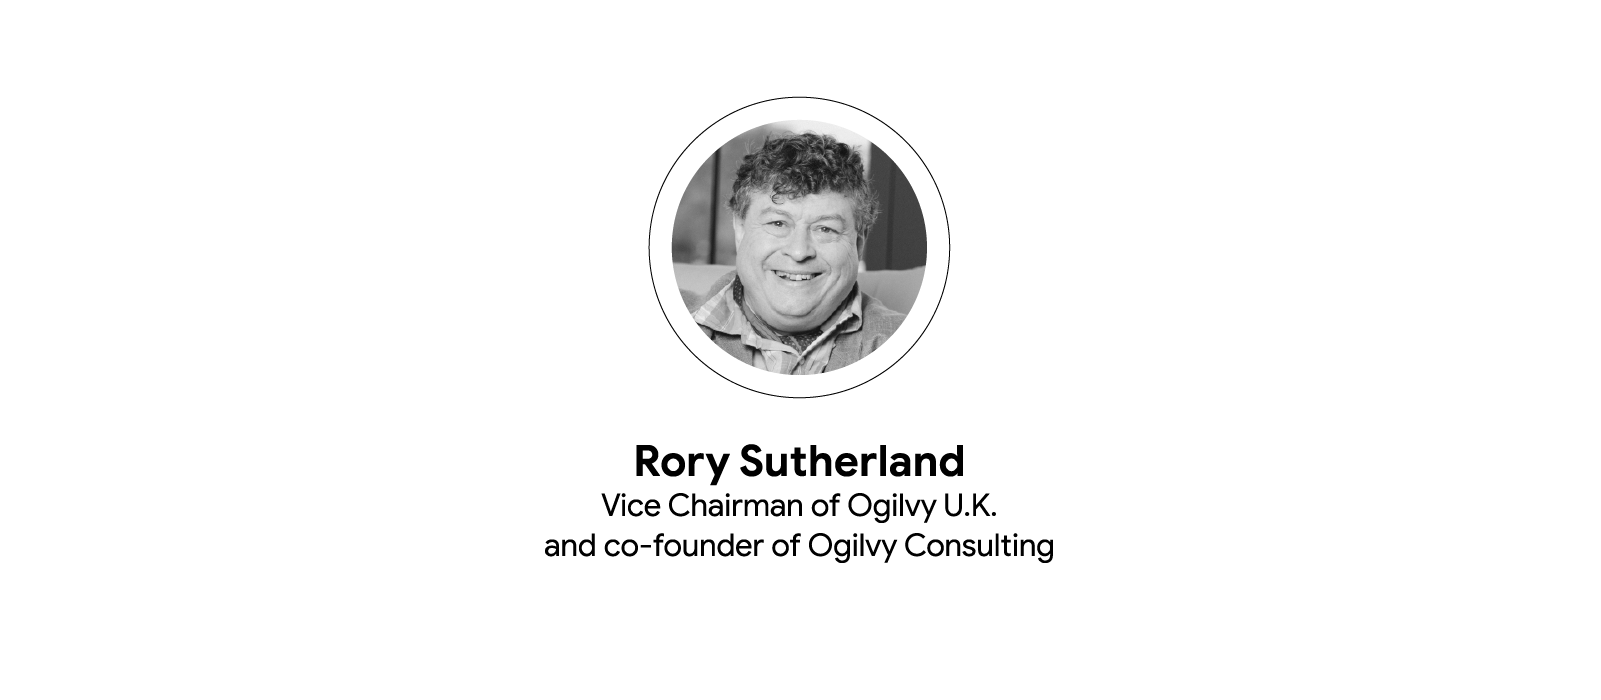 Finding the ‘Why’ behind consumer behaviour with Ogilvy U.K.’s Rory Sutherland